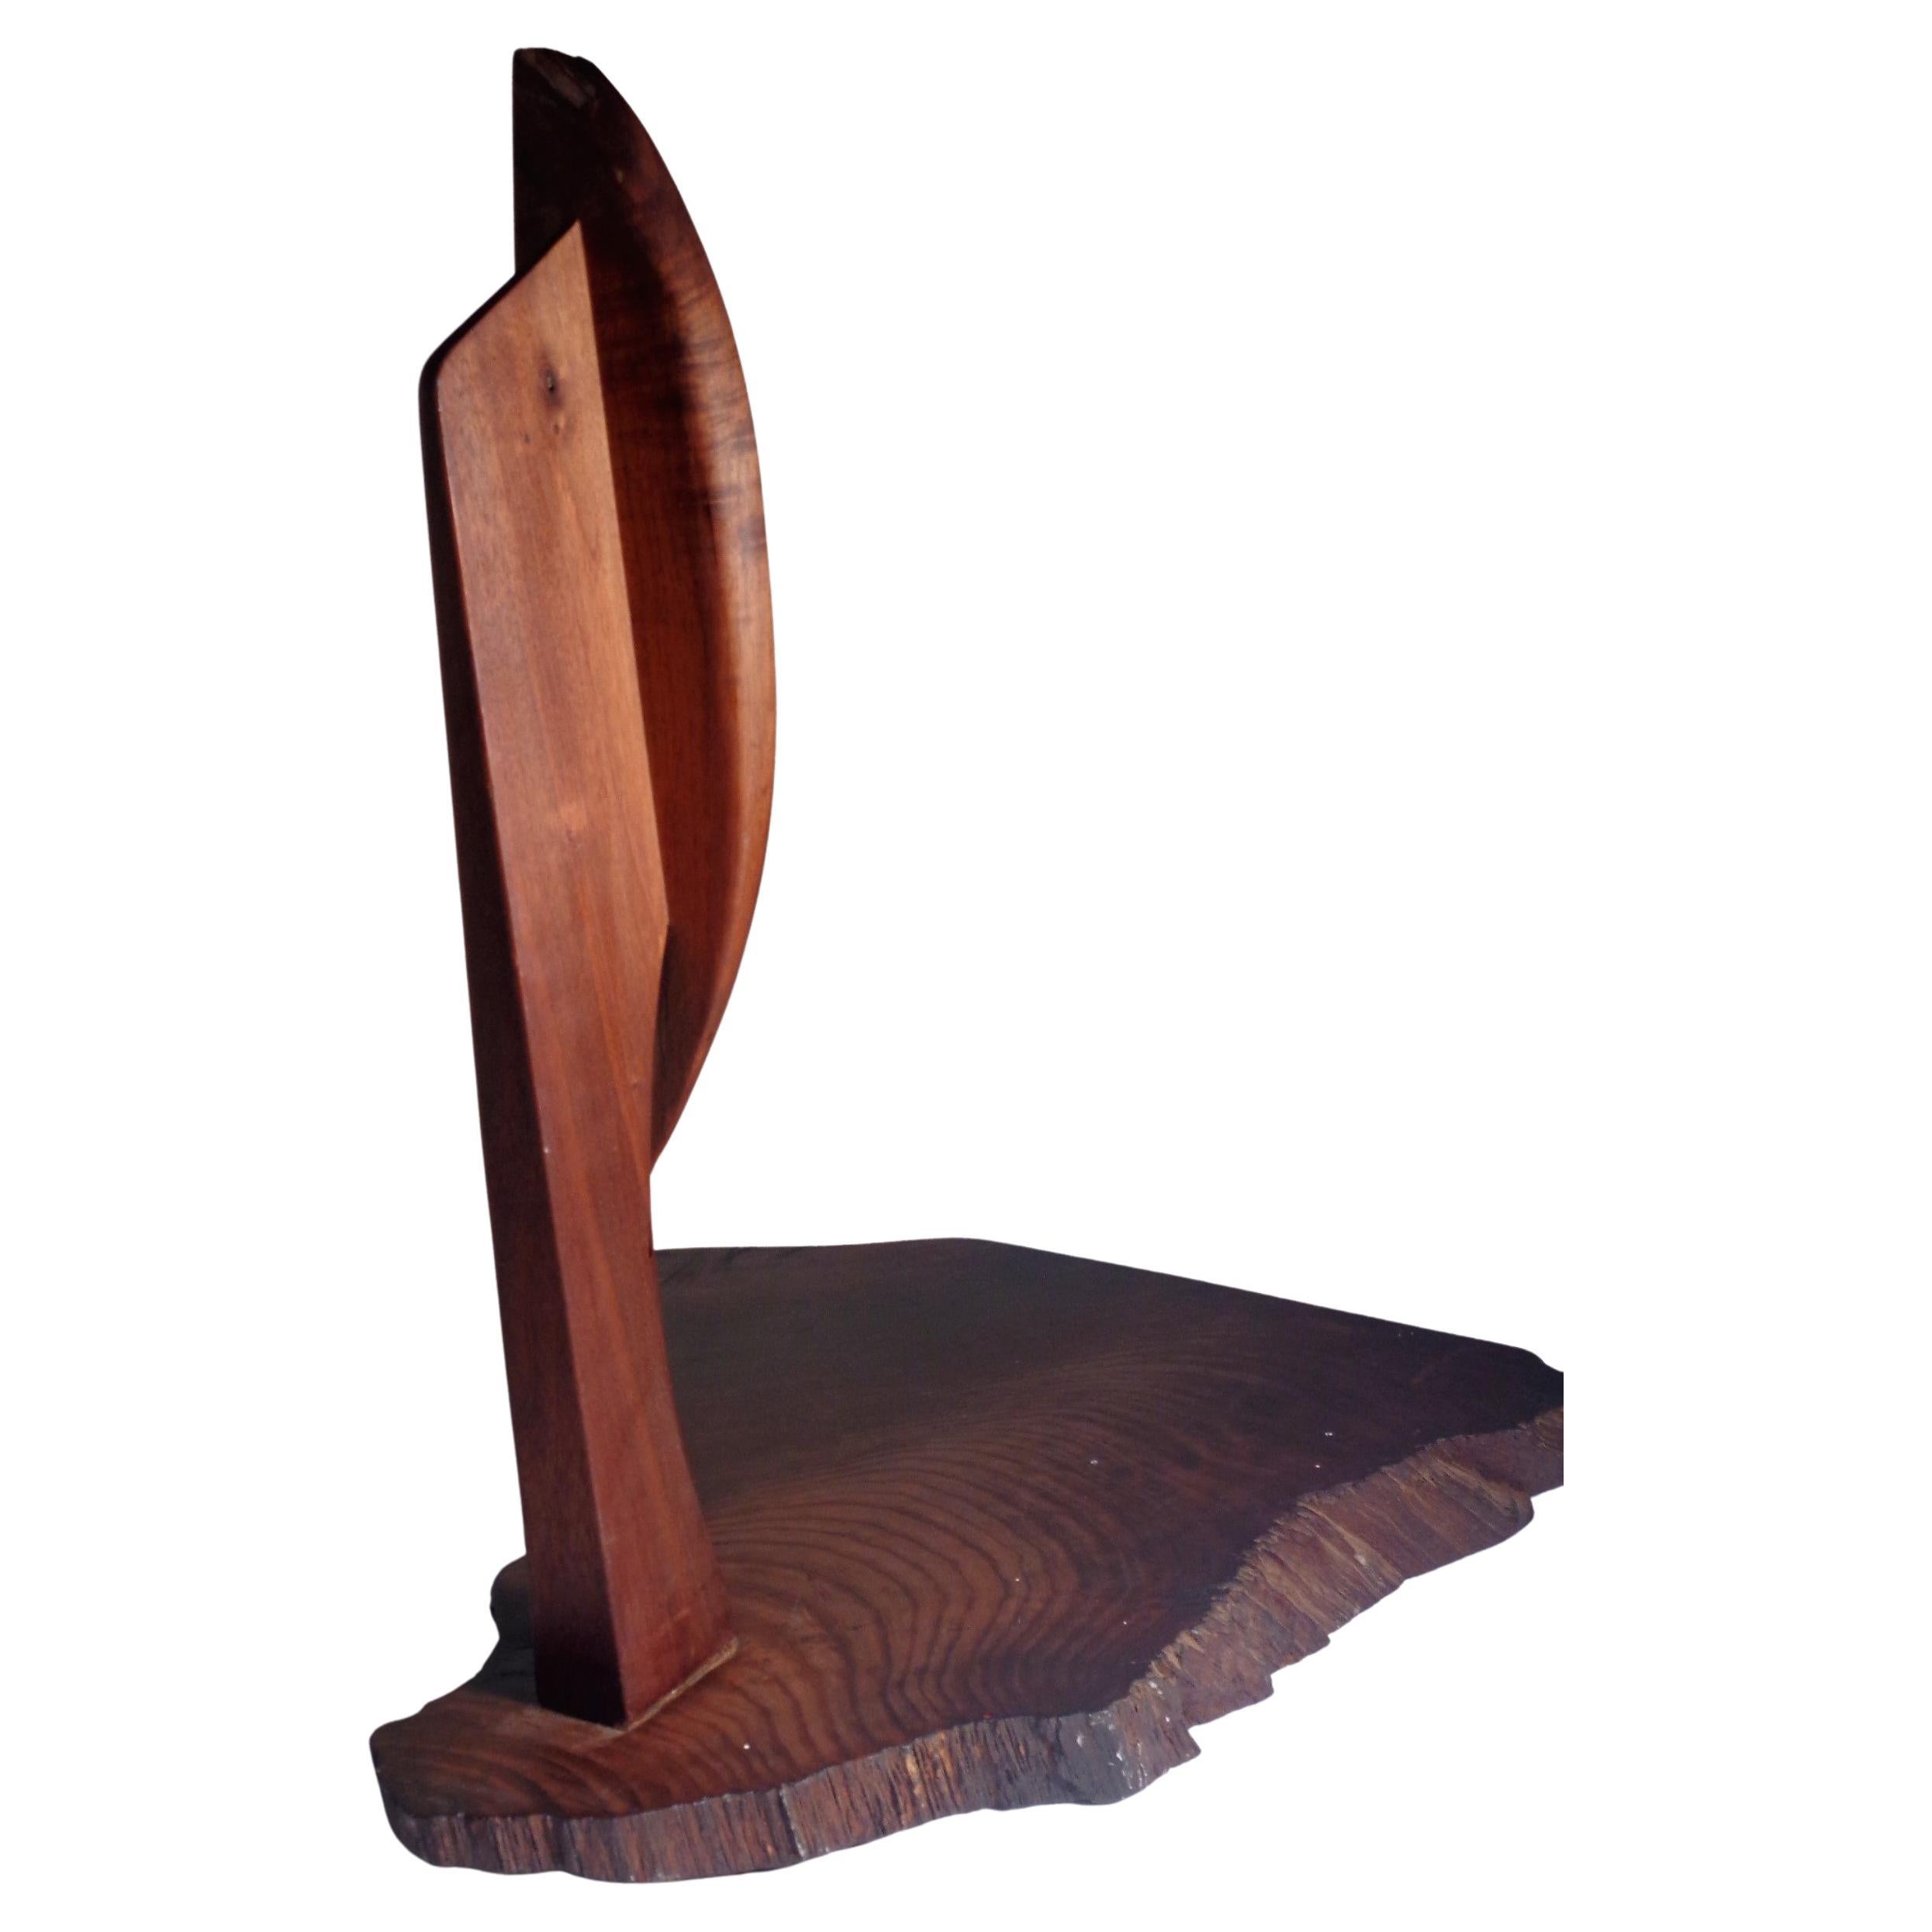 American Studio Craft Movement Modernist Abstract Wood Sculpture, 1970-1980 For Sale 2